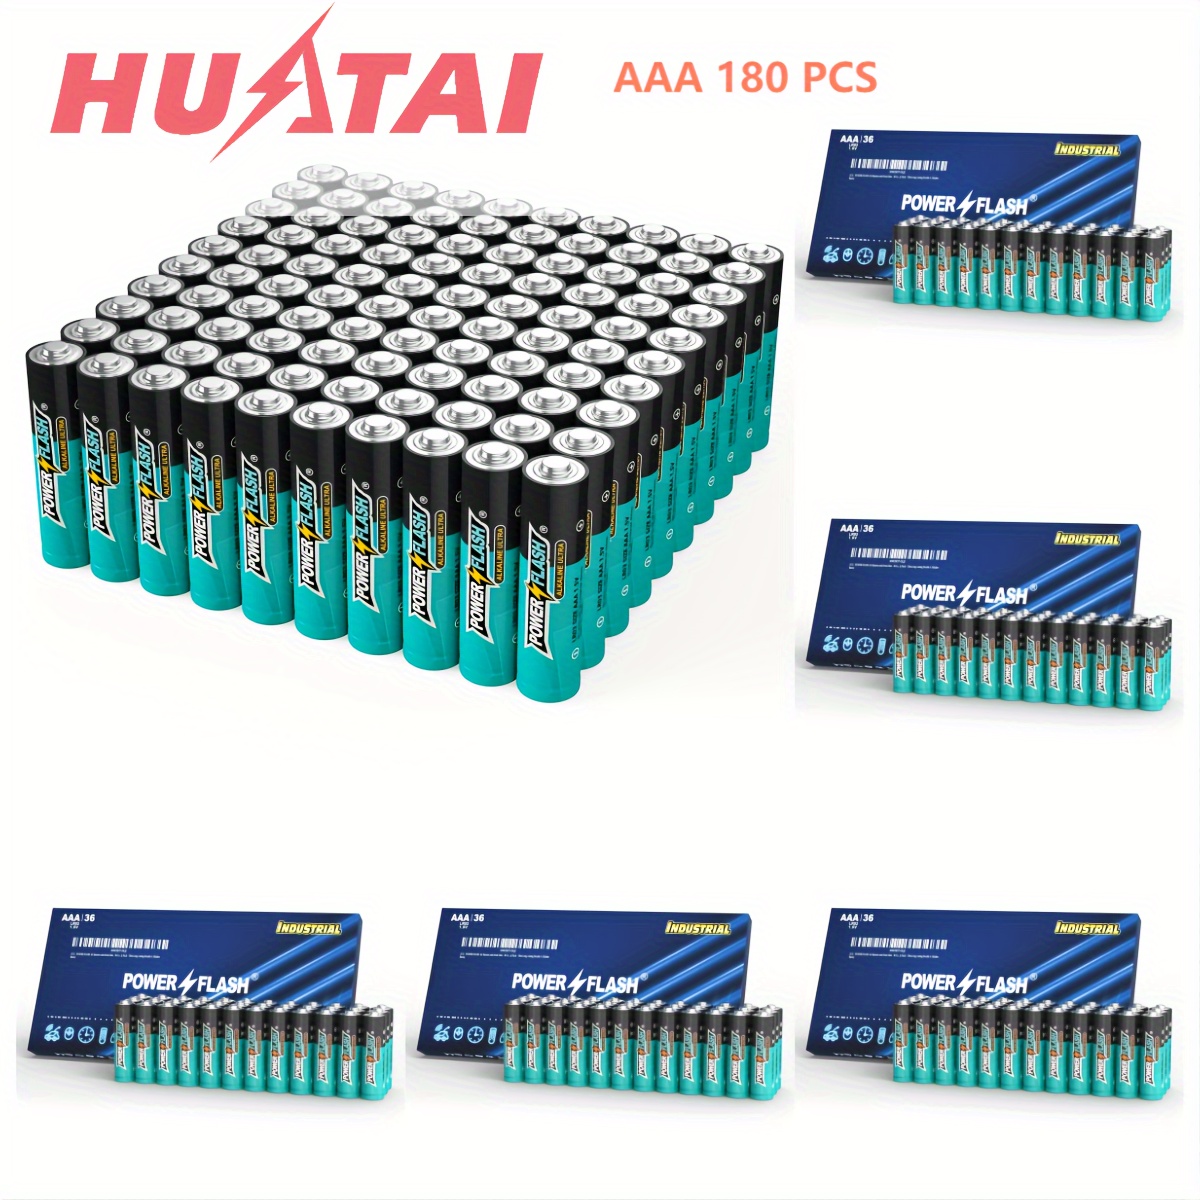 

Huatai Powerflash Aaa 180 Pcs High-performance Alkaline Batteries Value Pack, Lr03, Triple A Batteries For Home, Various Household Device, Romotes